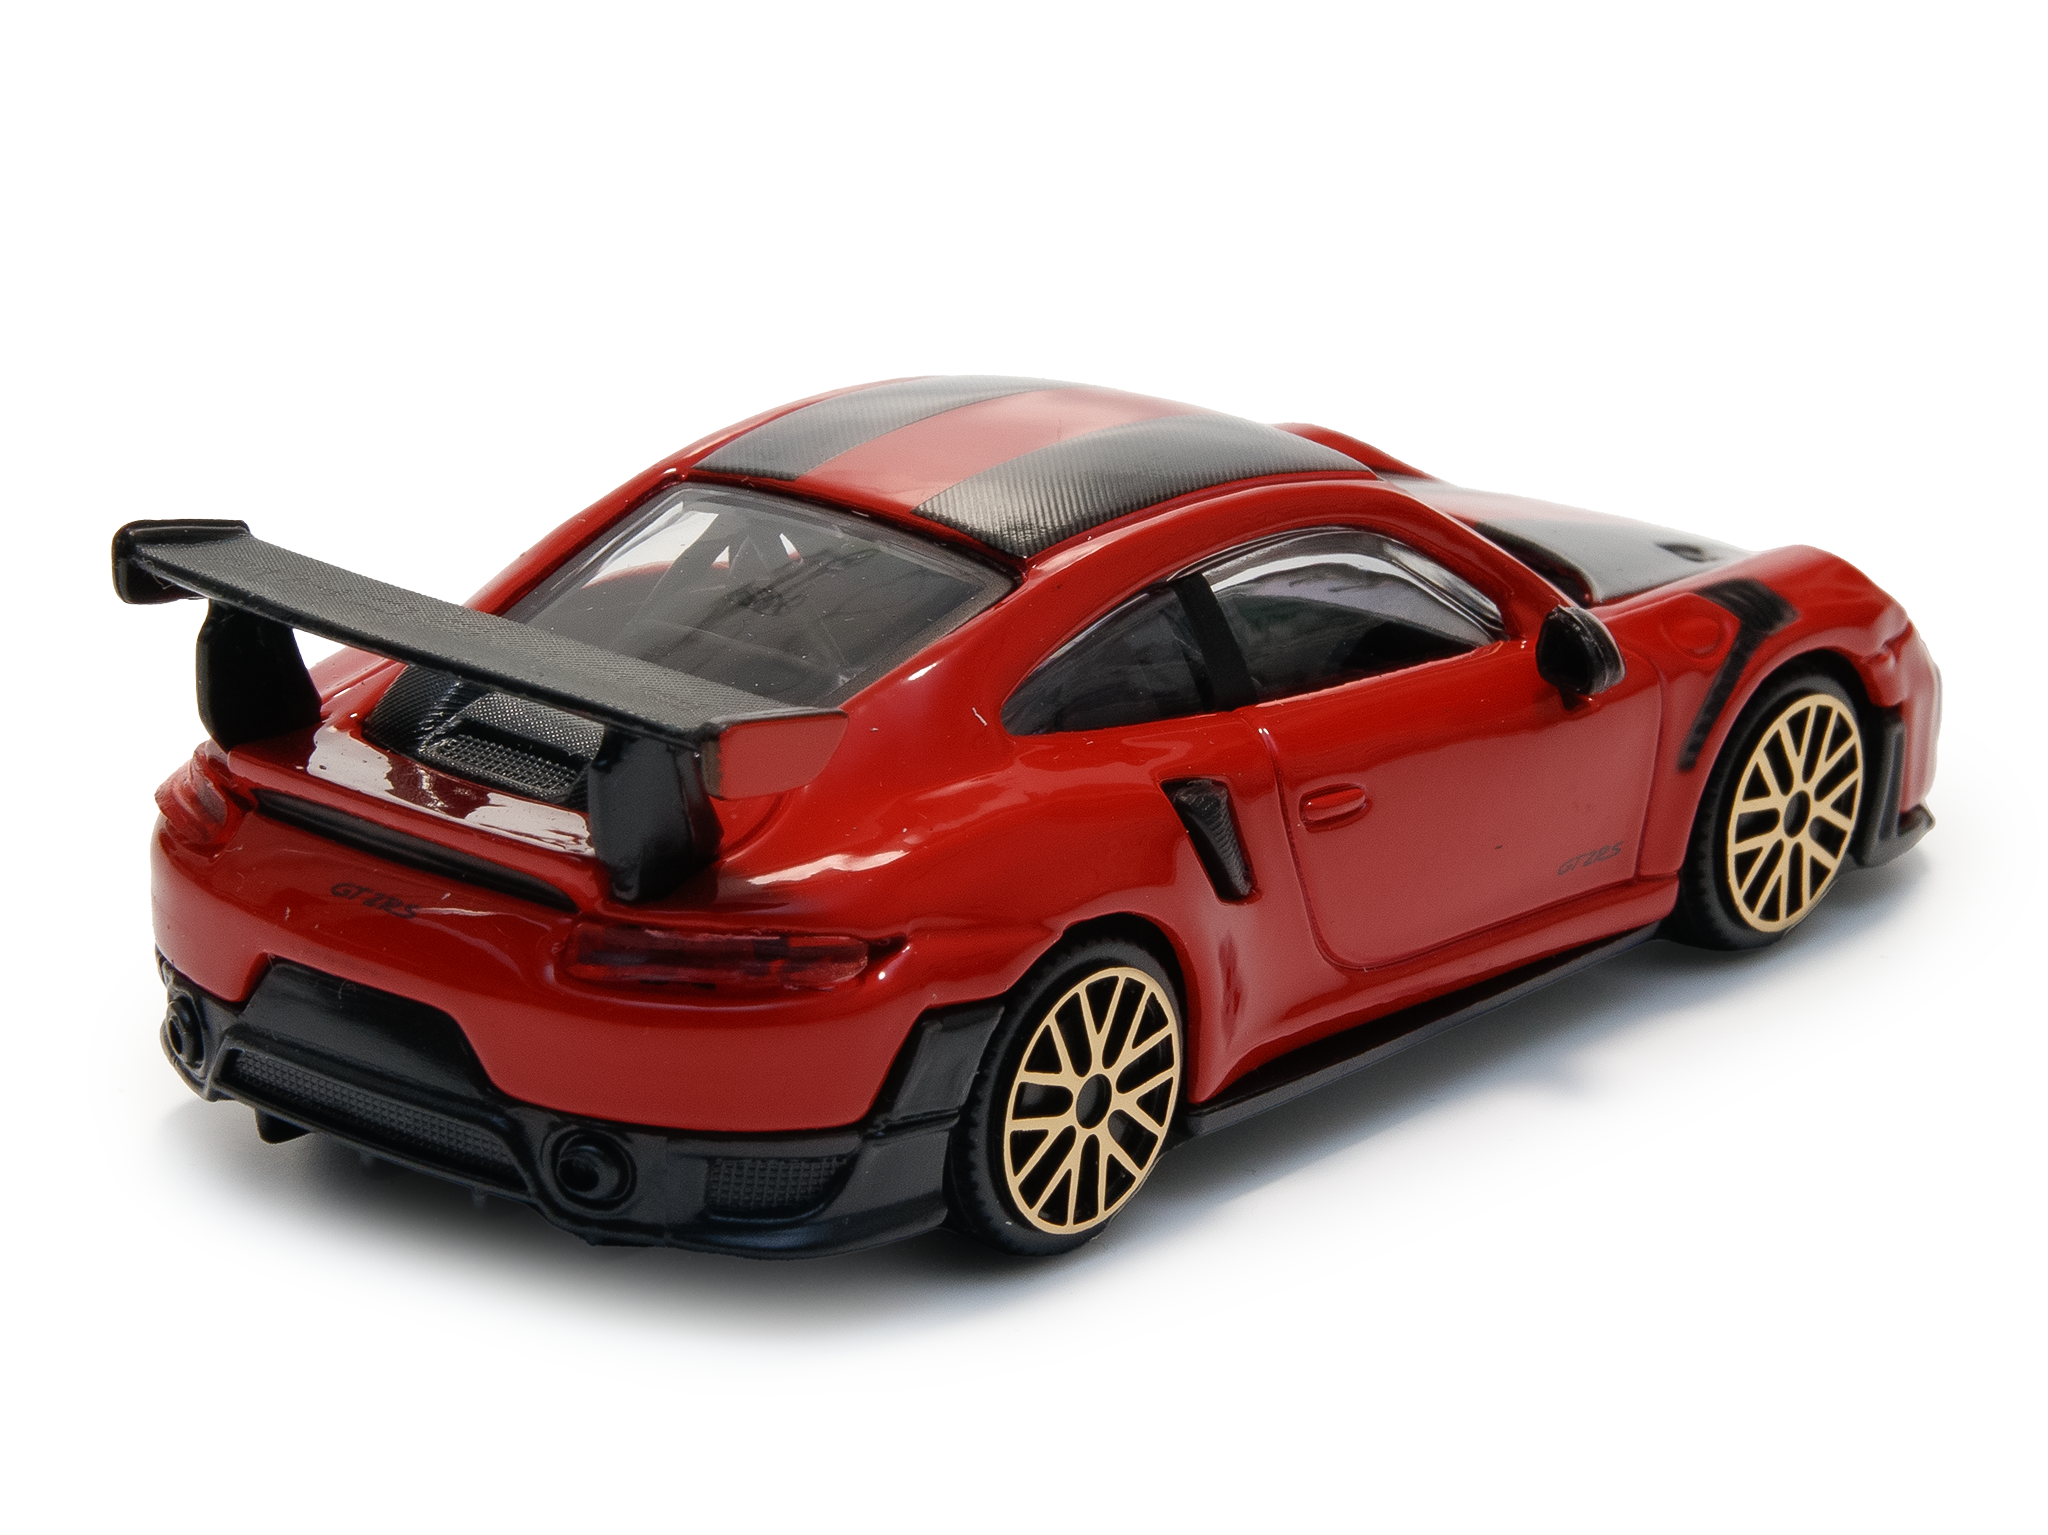 Porsche 911 GT2 RS red - 1:43 Scale